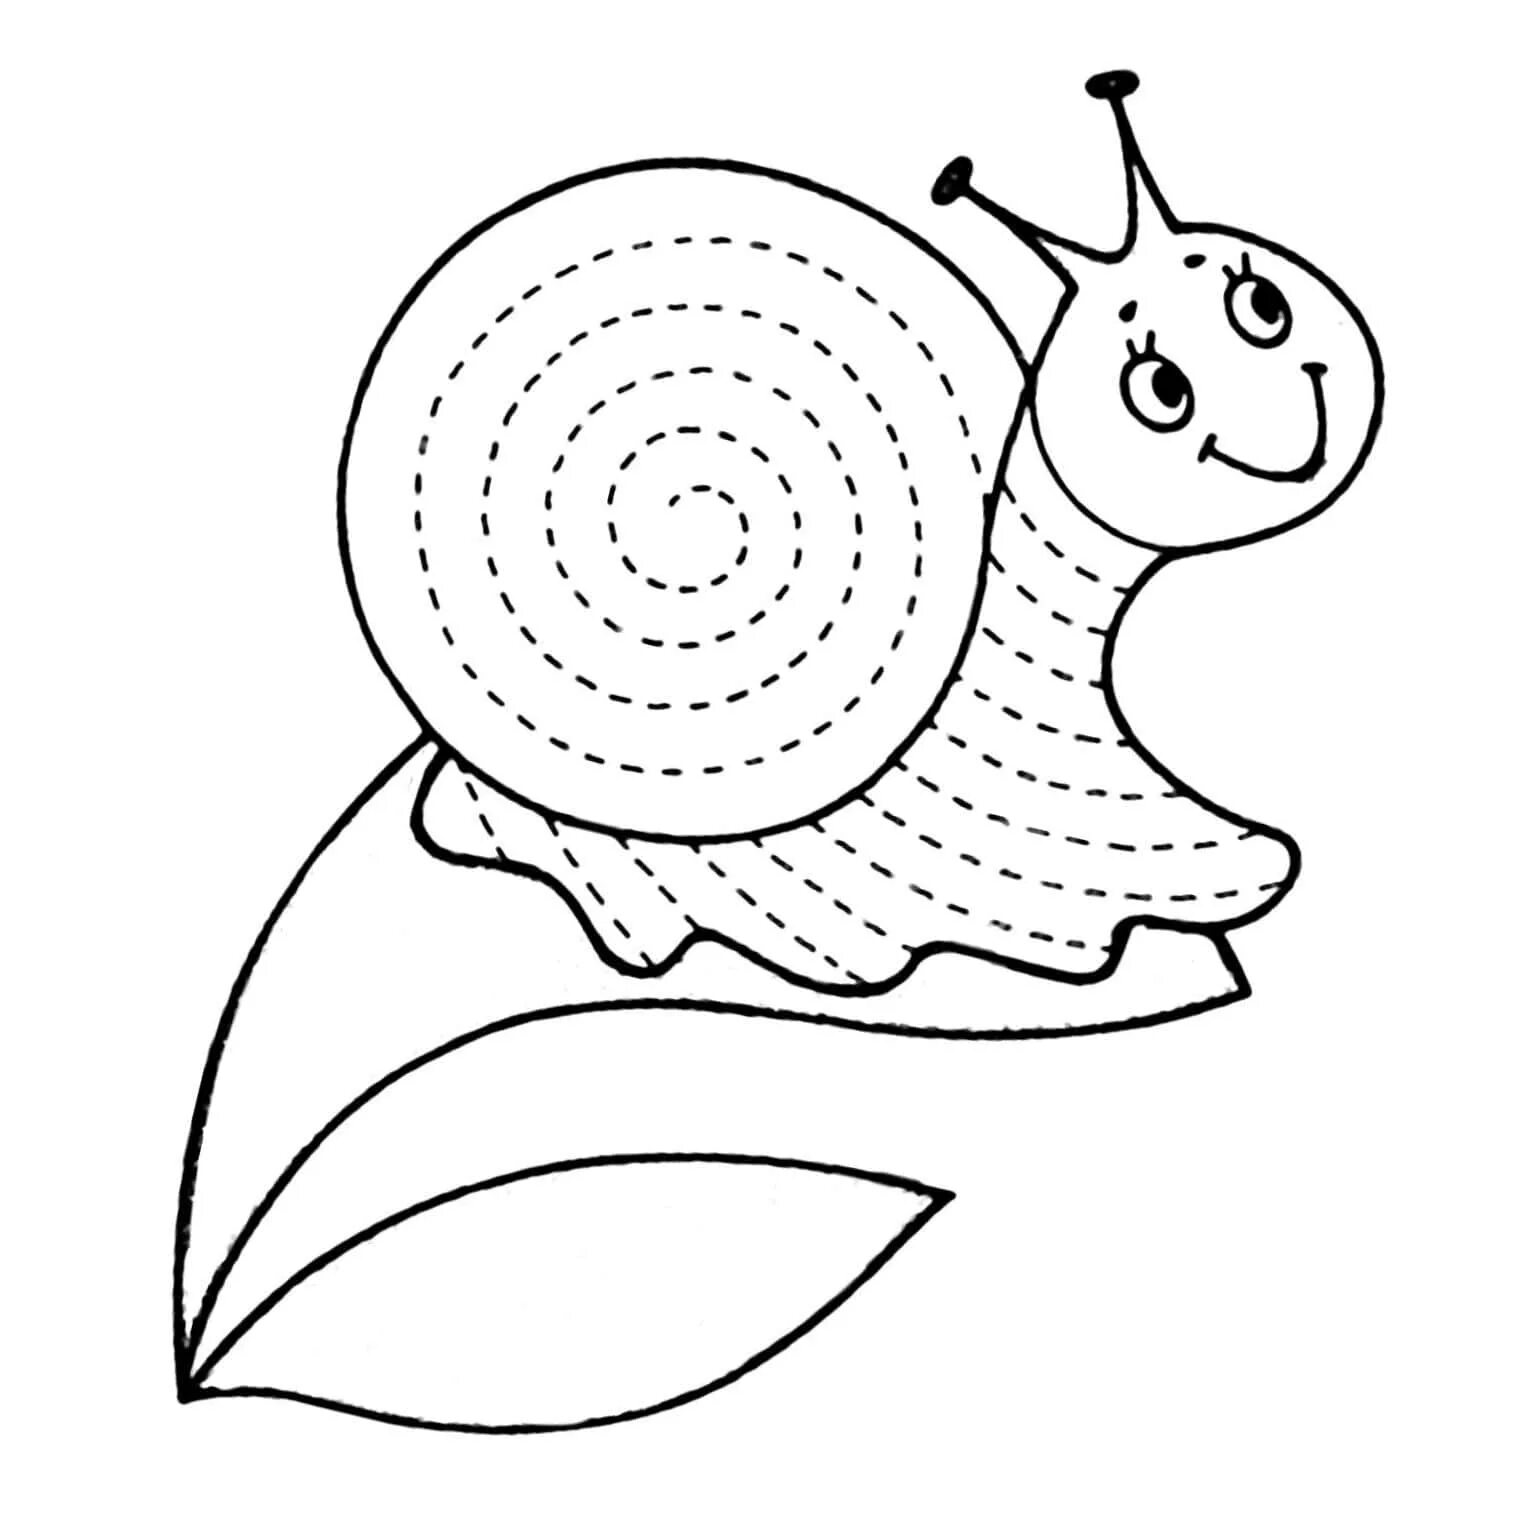 Snail Explosive coloring book for 3-4 year olds